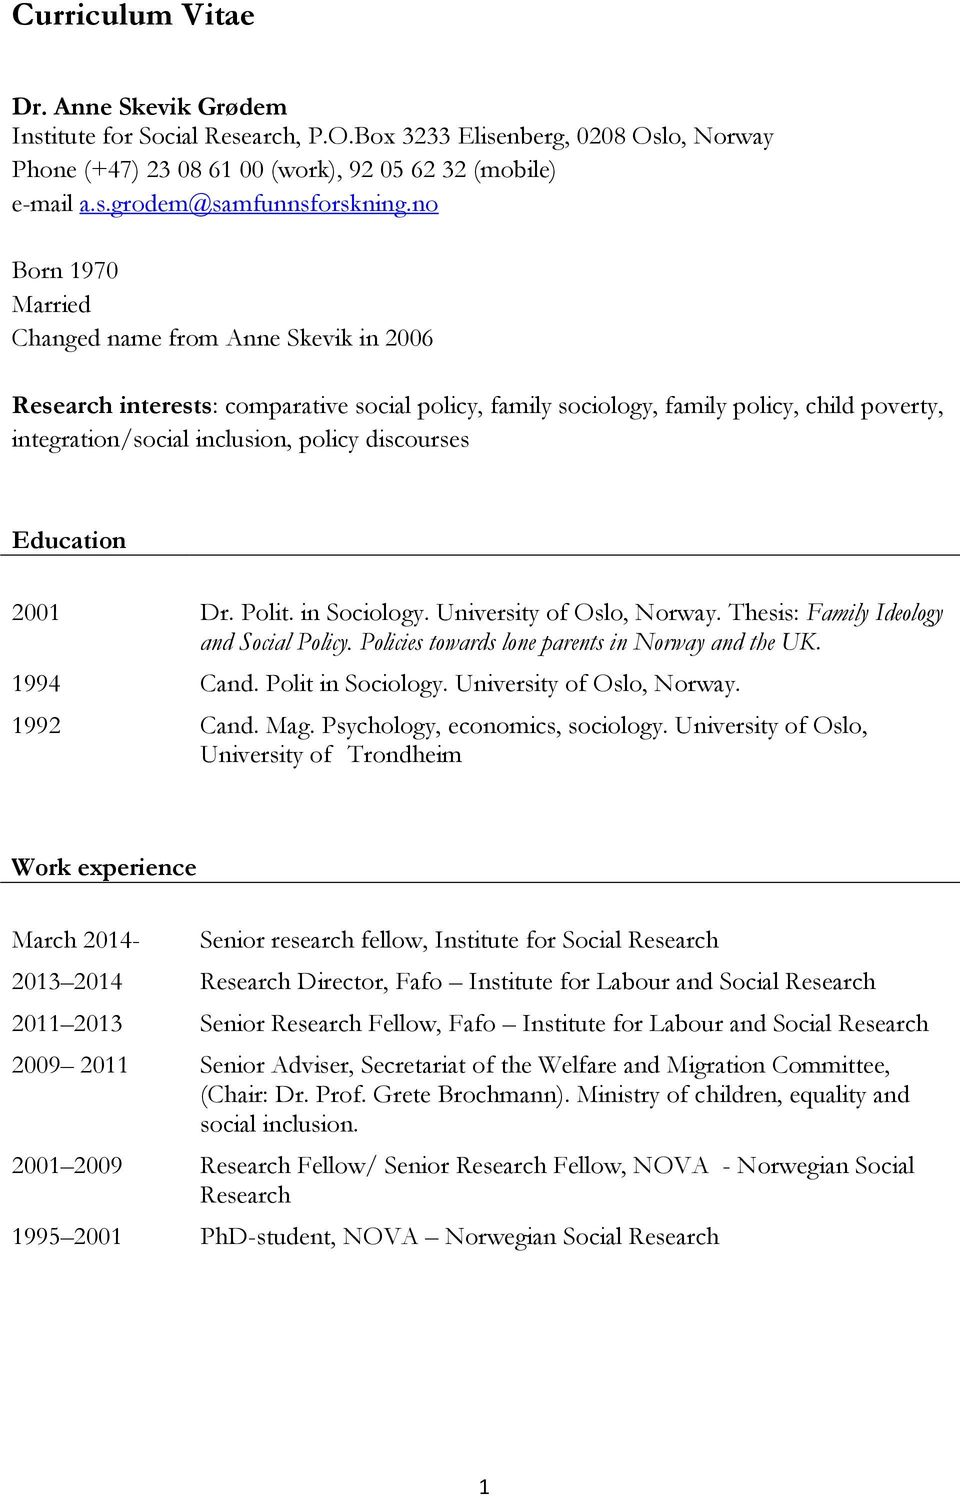 discourses Education 2001 Dr. Polit. in Sociology. University of Oslo, Norway. Thesis: Family Ideology and Social Policy. Policies towards lone parents in Norway and the UK. 1994 Cand.